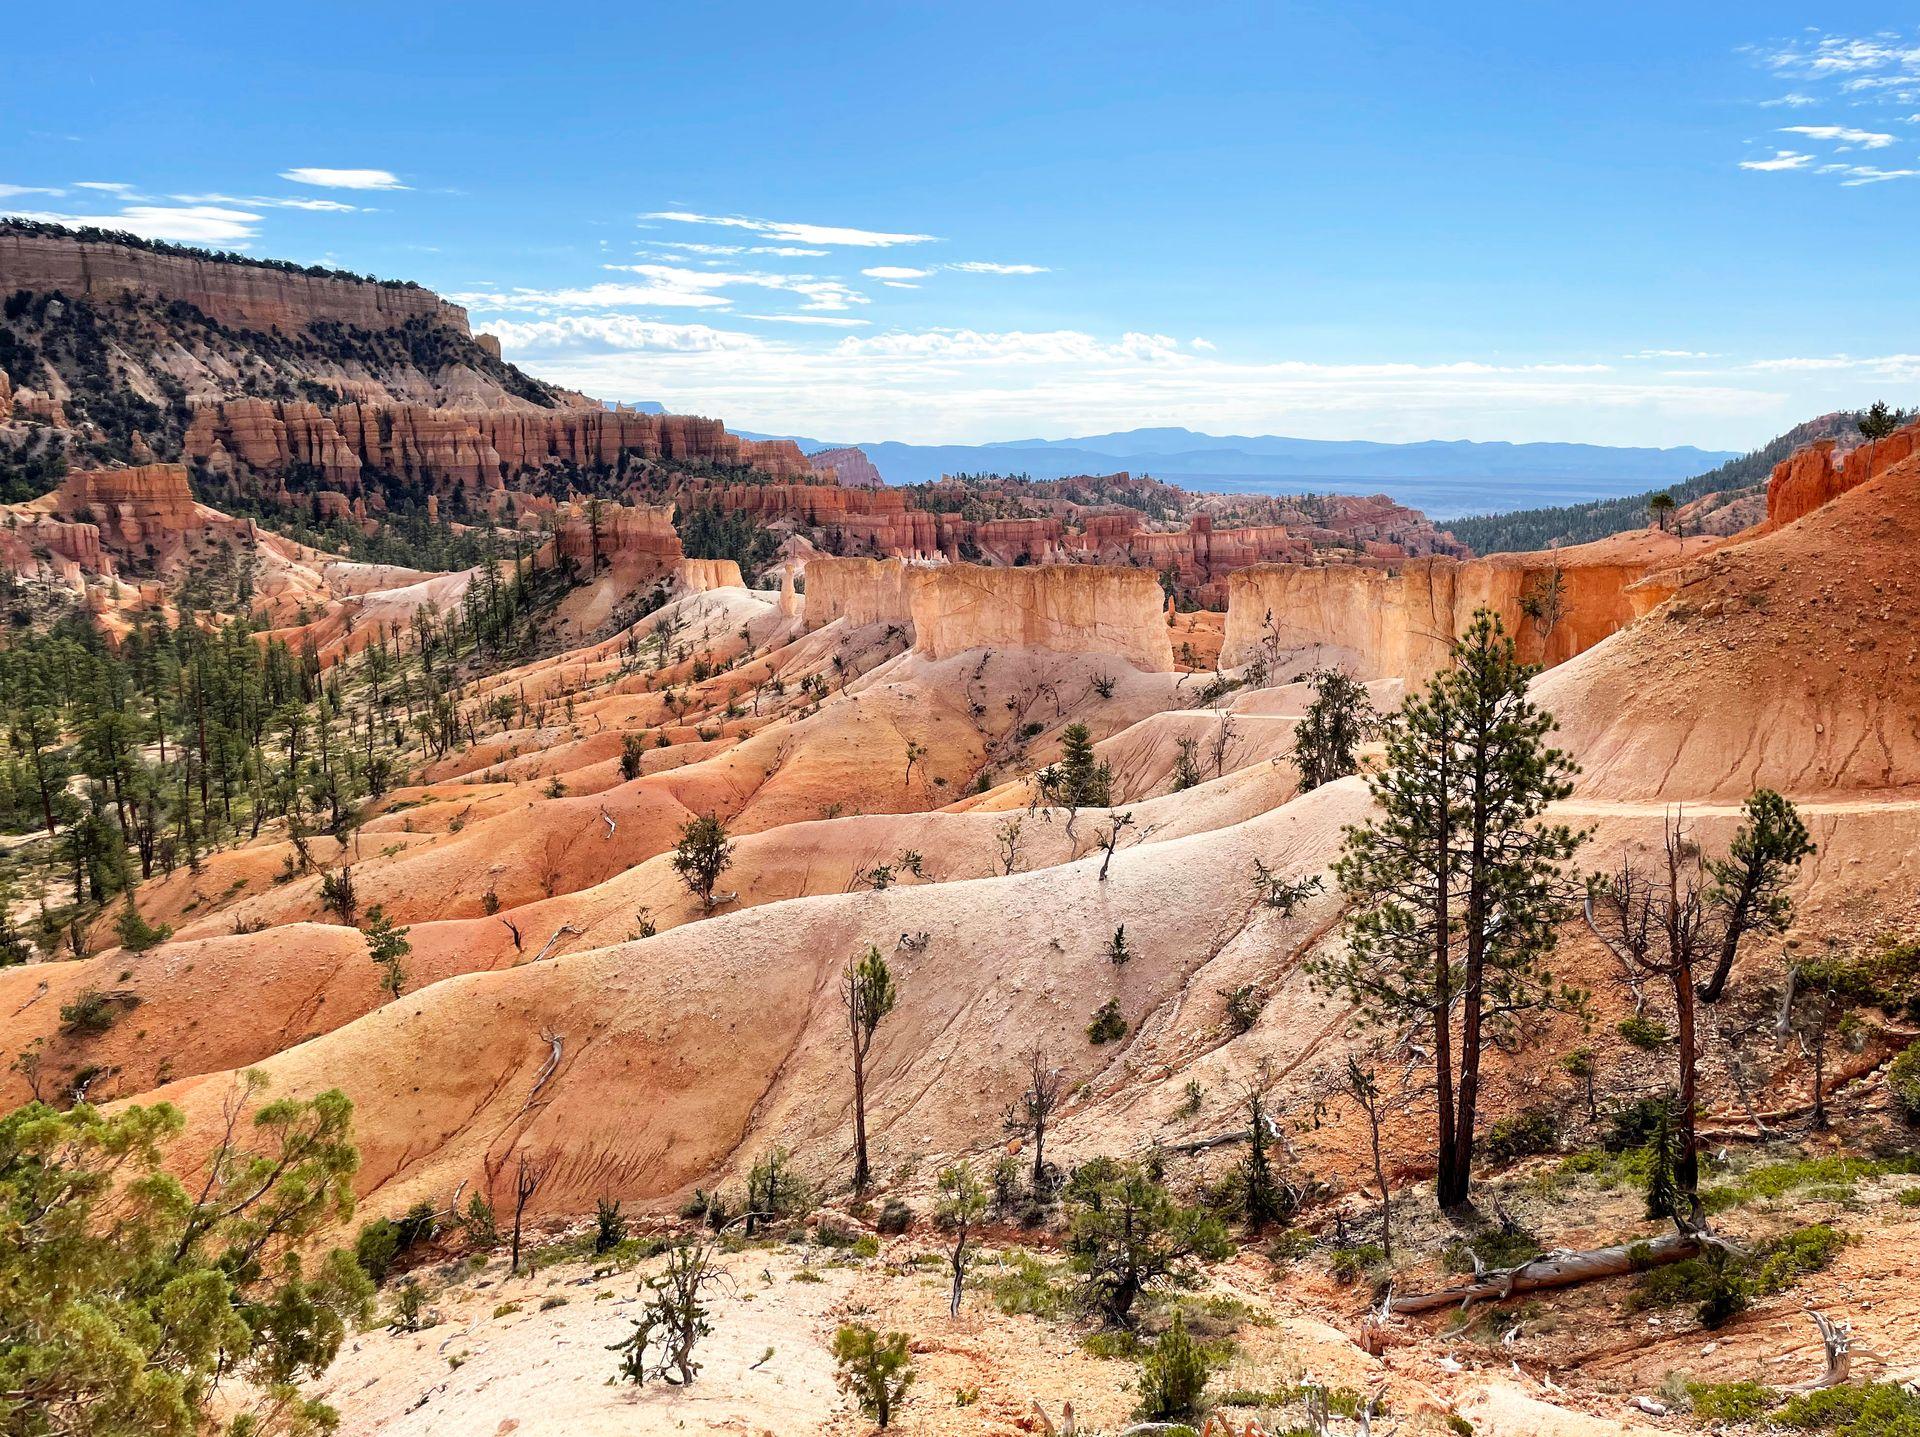 A view of orange rocks and hoodoos on the Fairyland Loop trail. The closer rocks are much smoother, meaning that the erosion is newer in this area of the park.